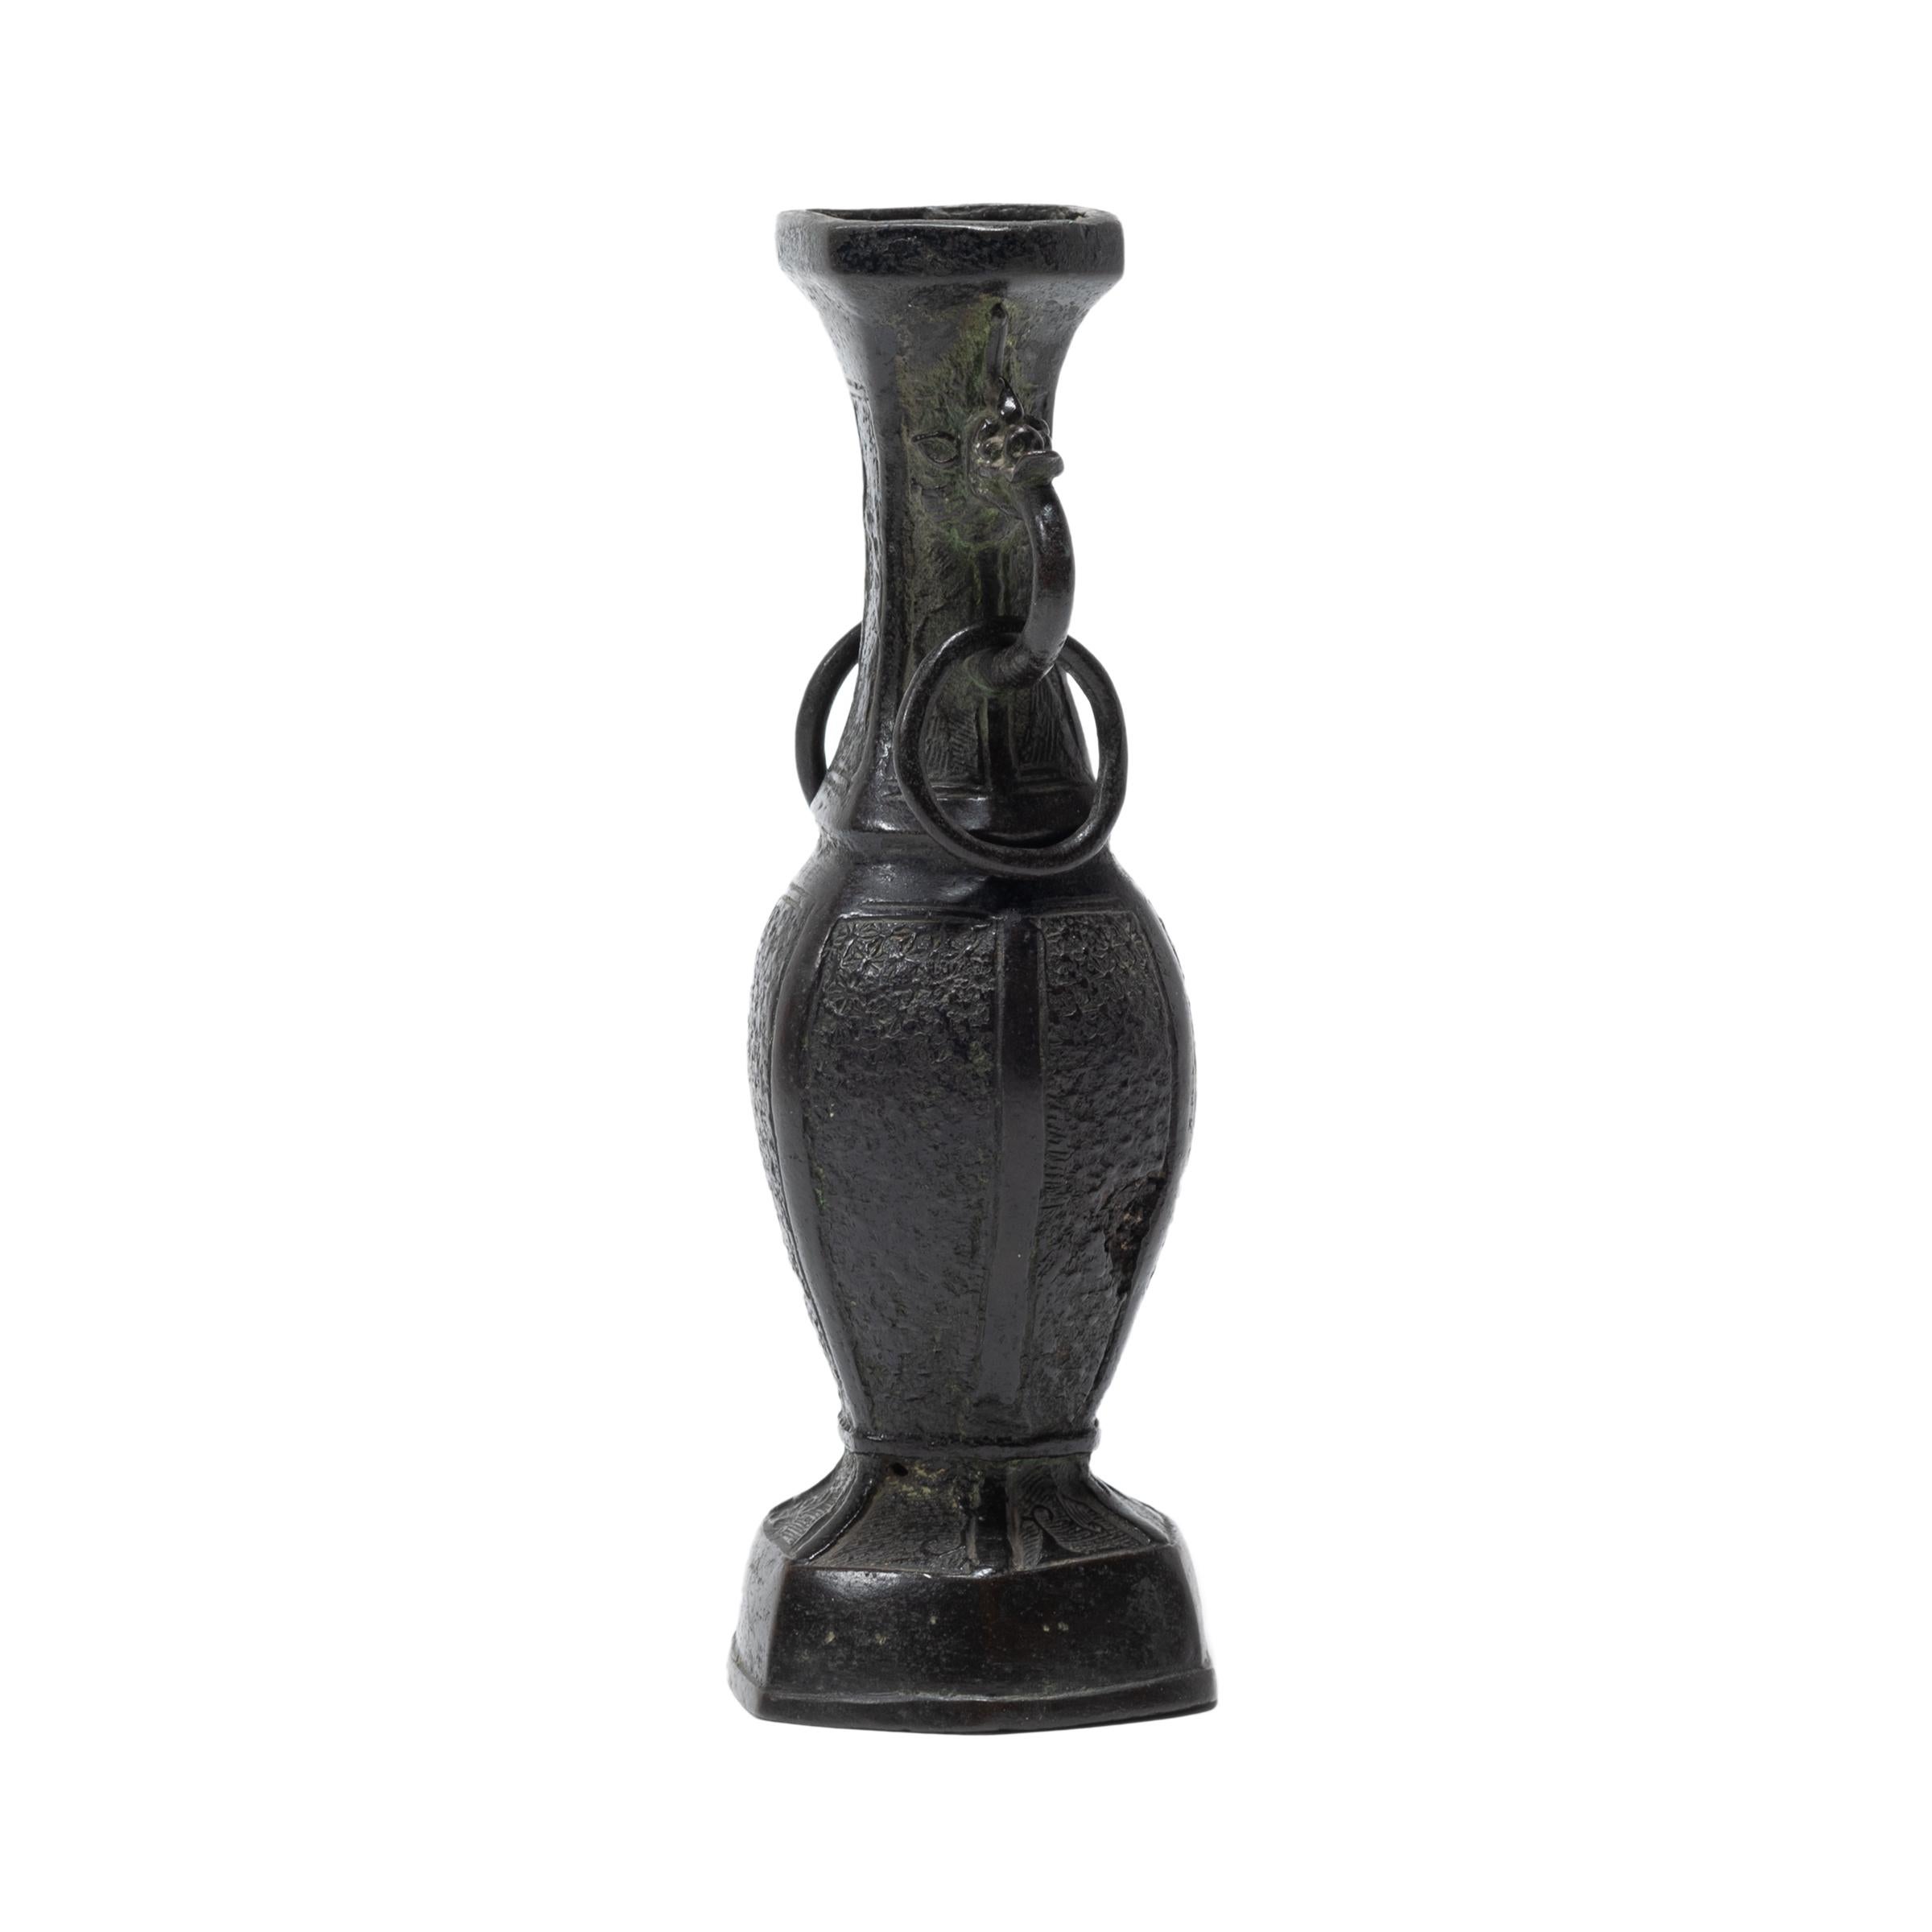 This early 18th century bronze vase is reminiscent of the ritual bronzes used by China’s earliest rulers. Reinterpreting a traditional bronze form, this petite six-sided vessel was cast with a rotund, tapered form set atop a footed base. An